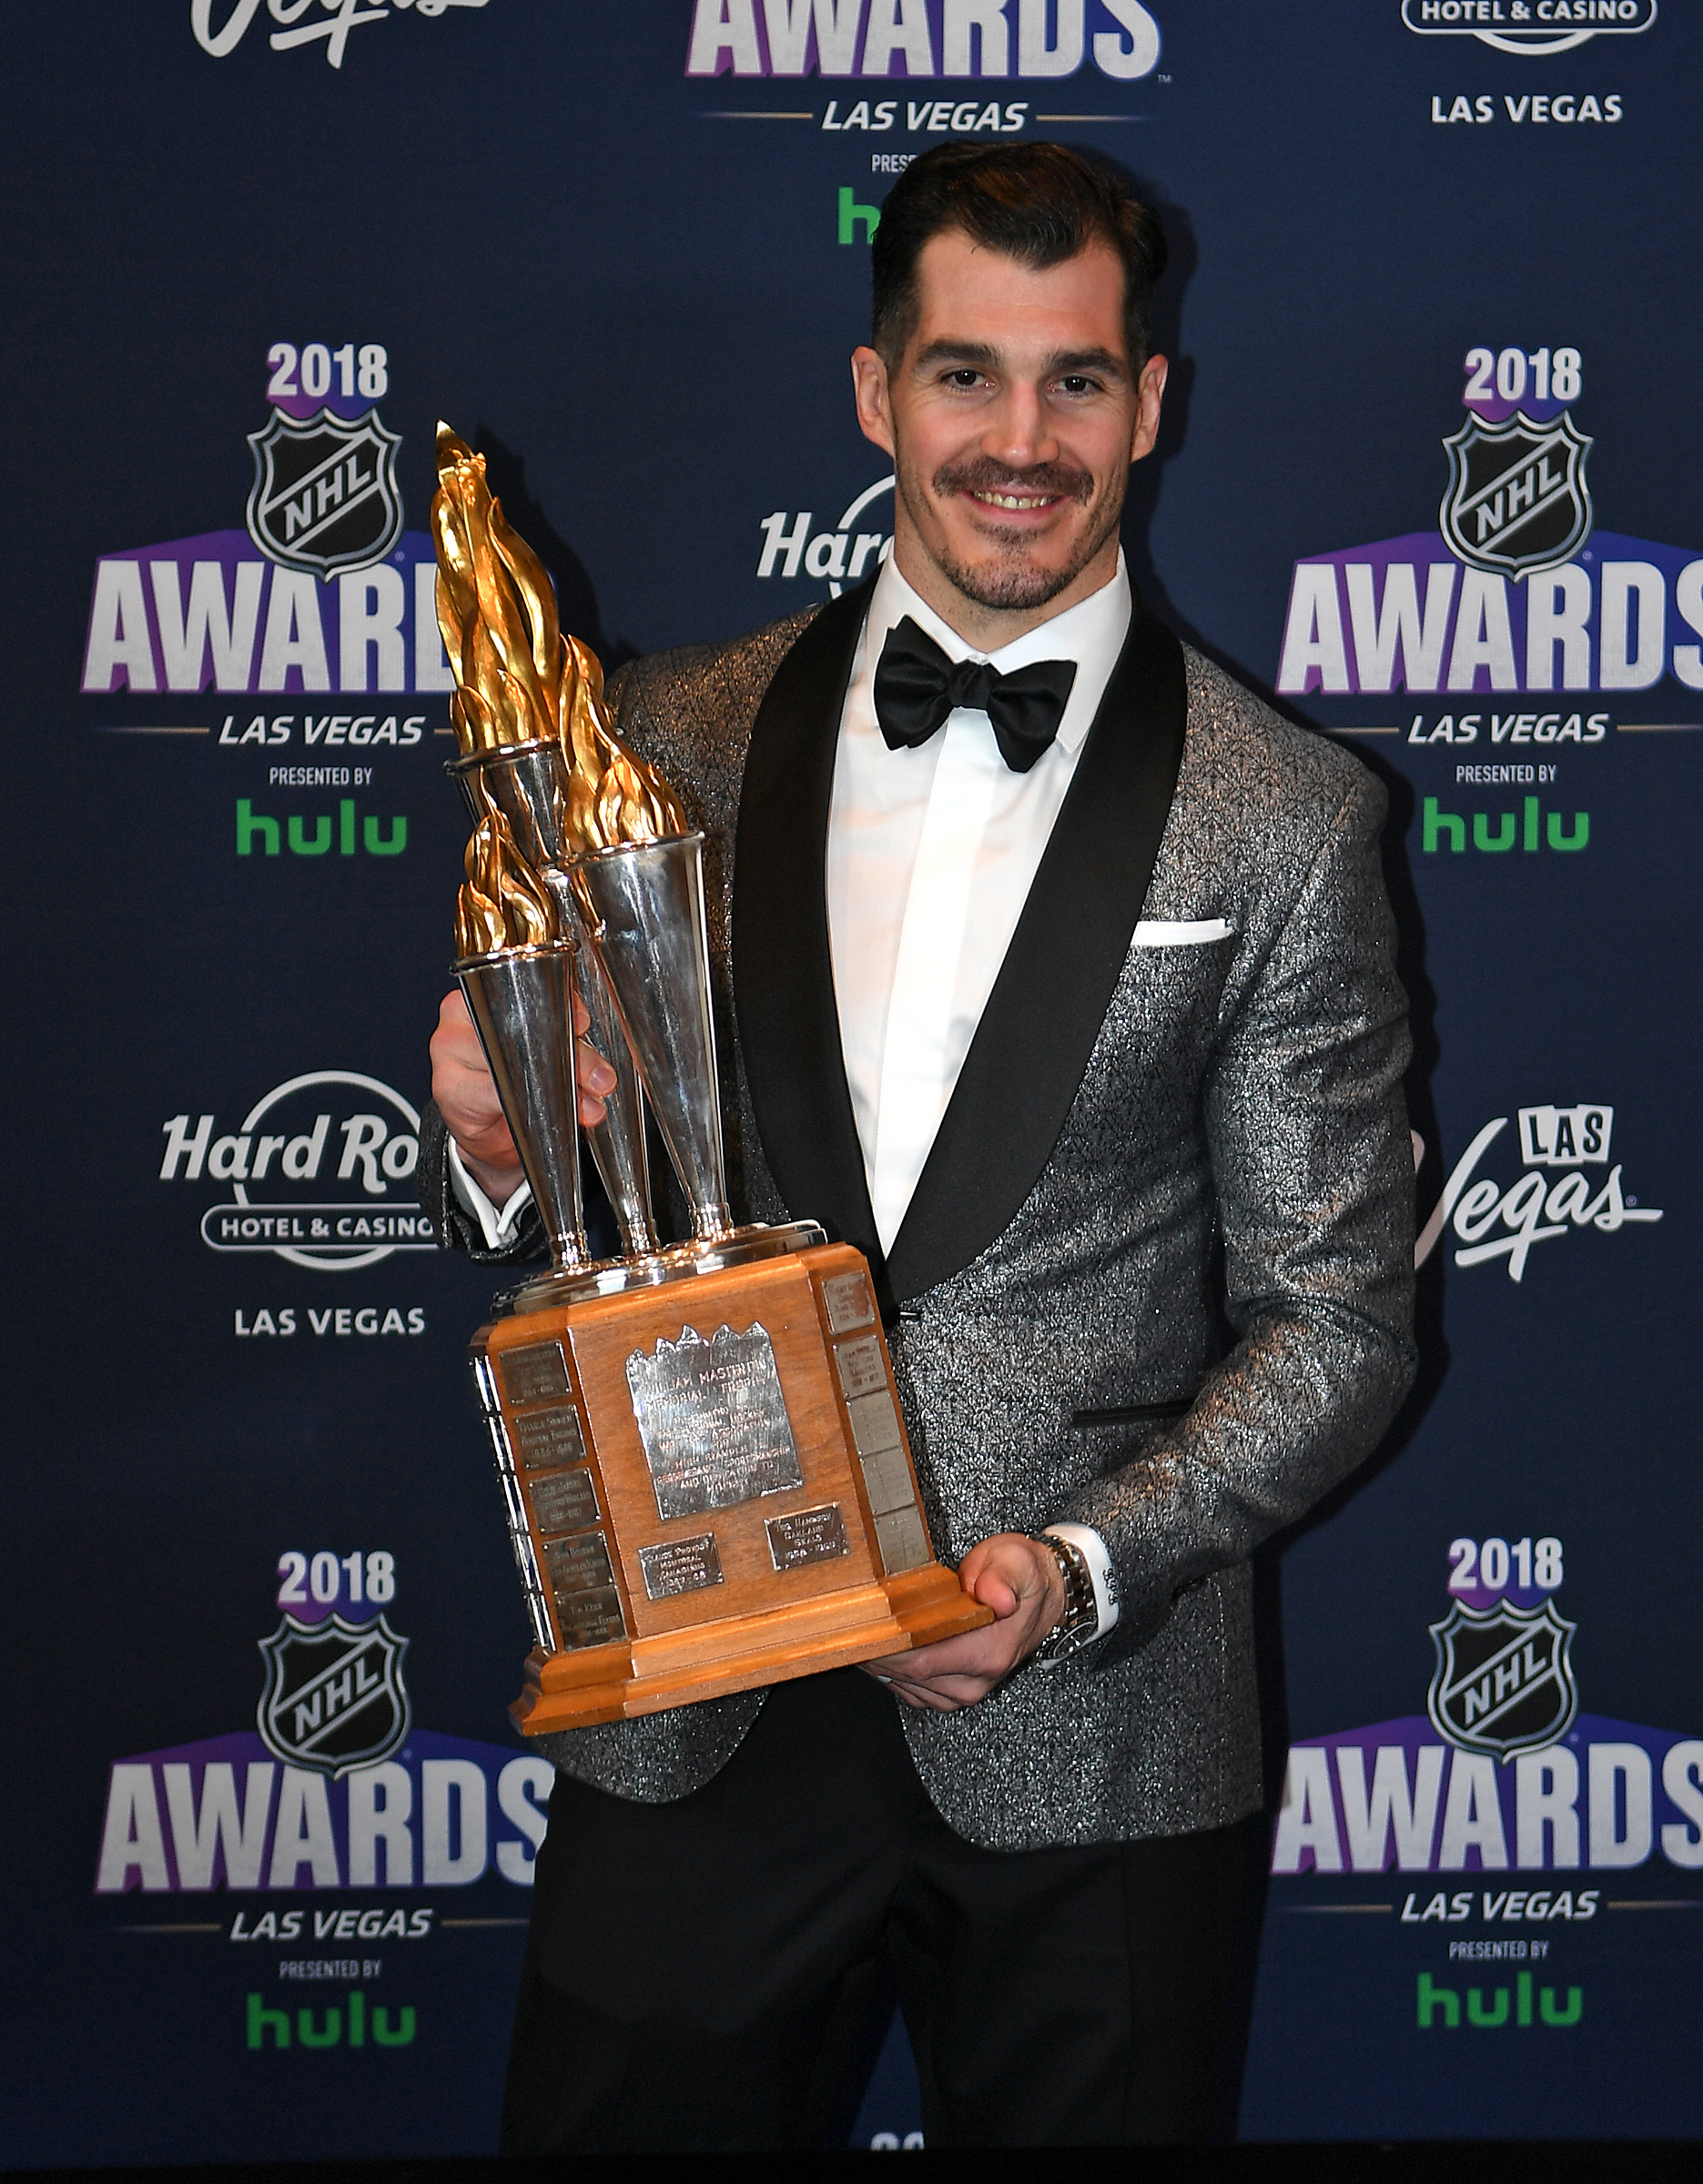 NJ Devils activate Brian Boyle for Hockey Fights Cancer game